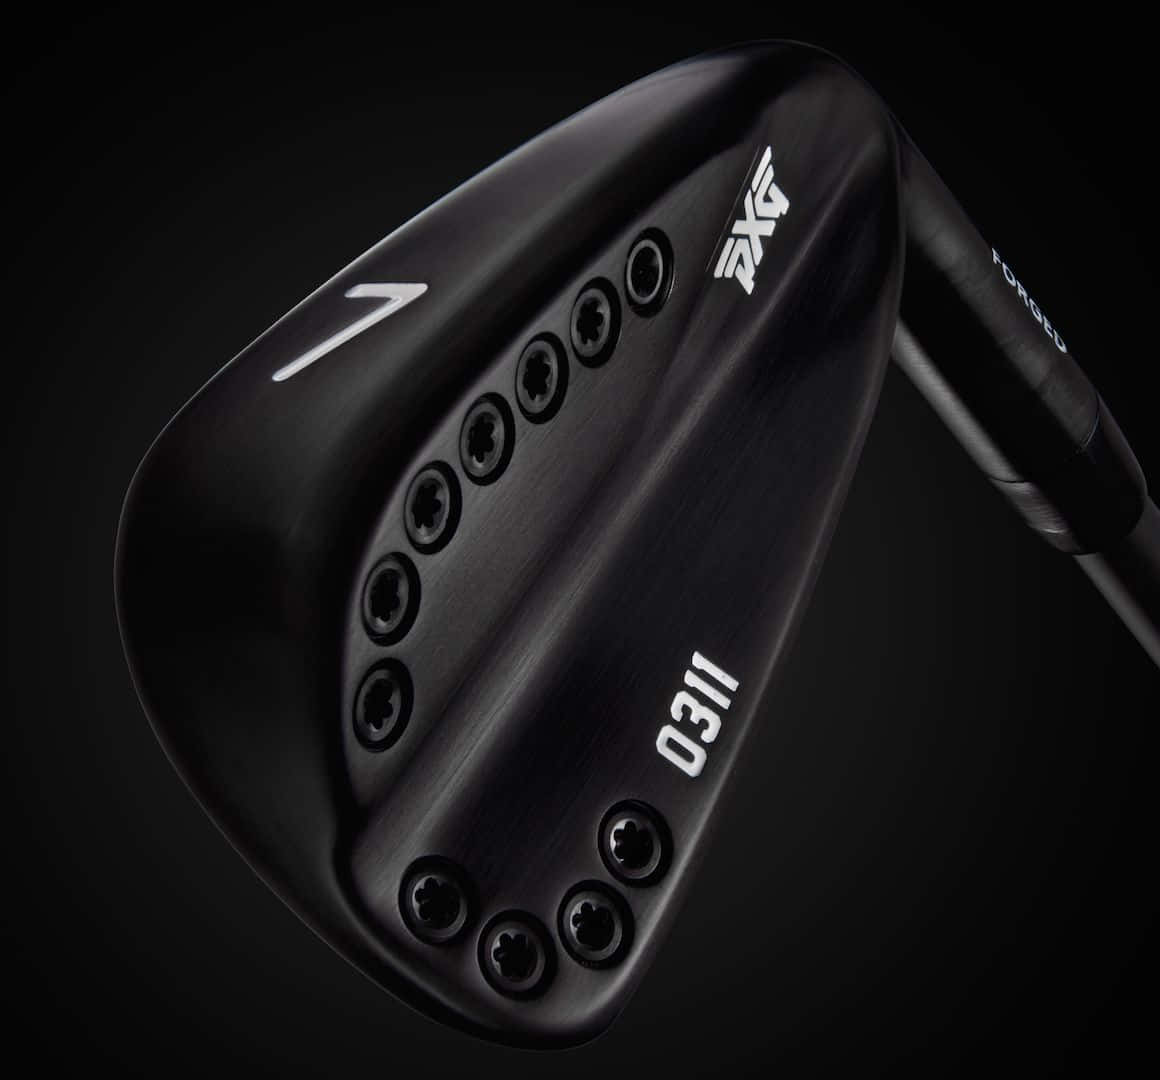 Take your golf game to the next level with the right club selection